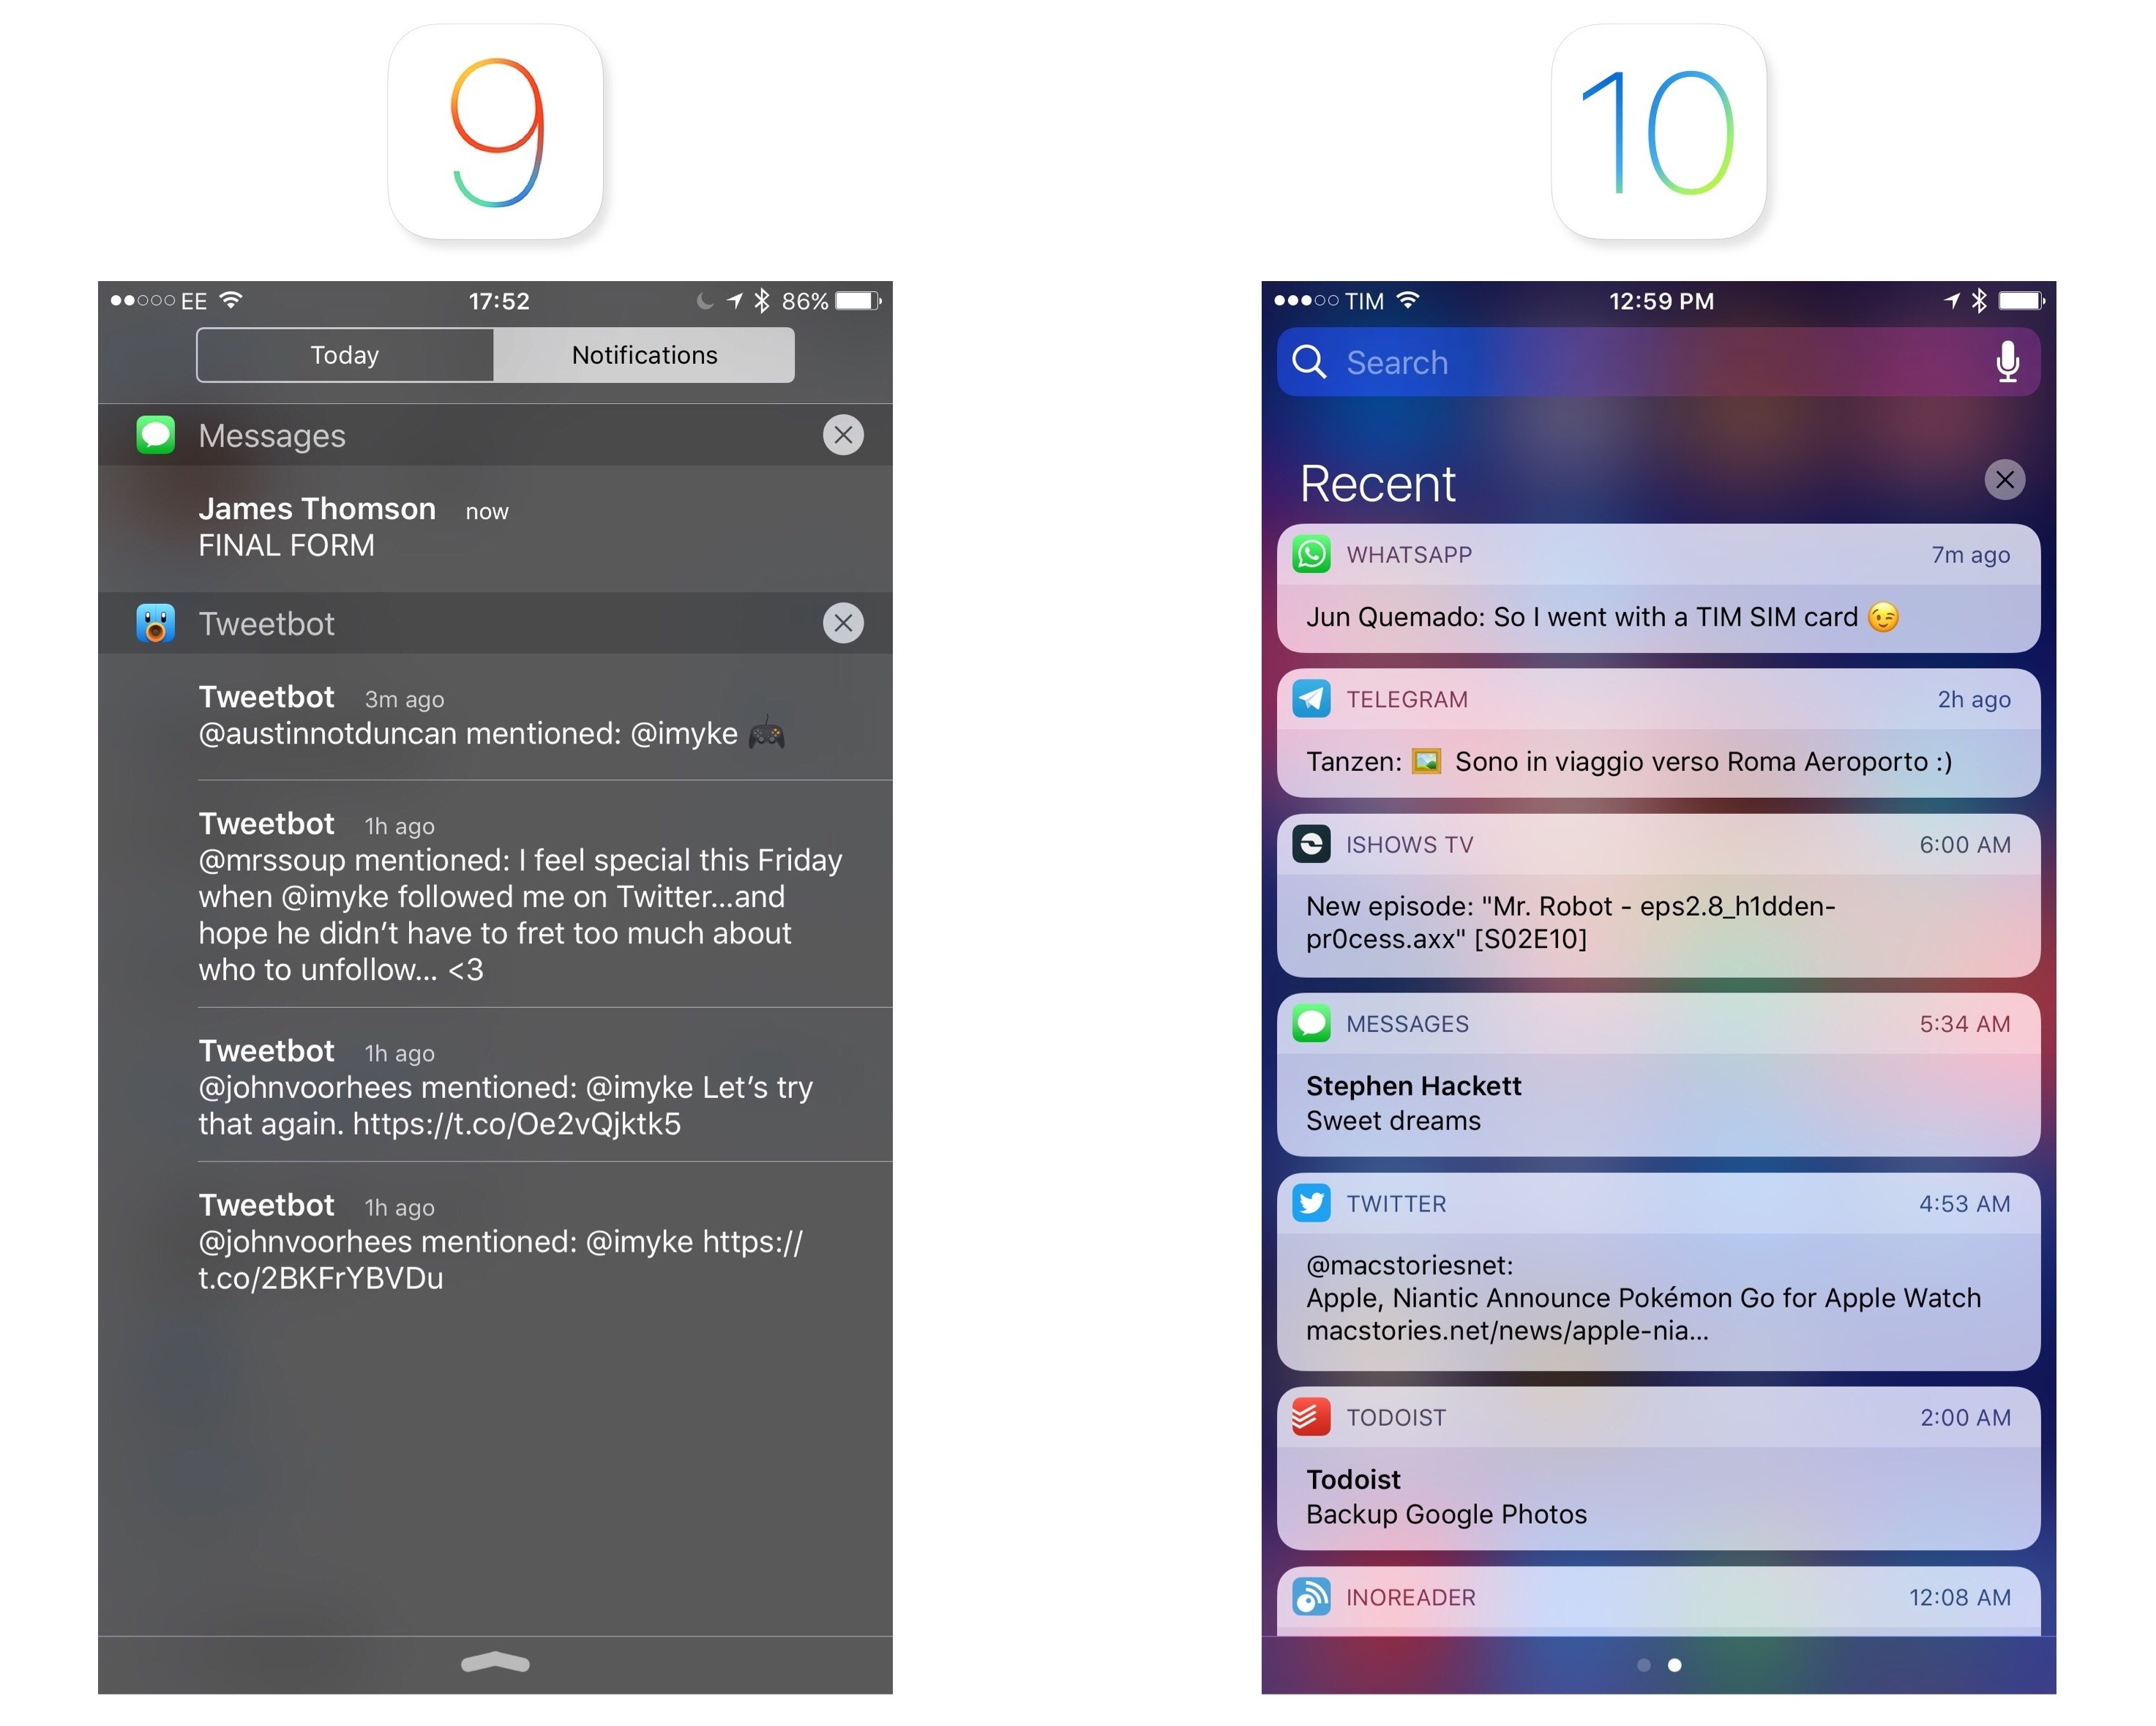 Notifications iOS 9 and 10.